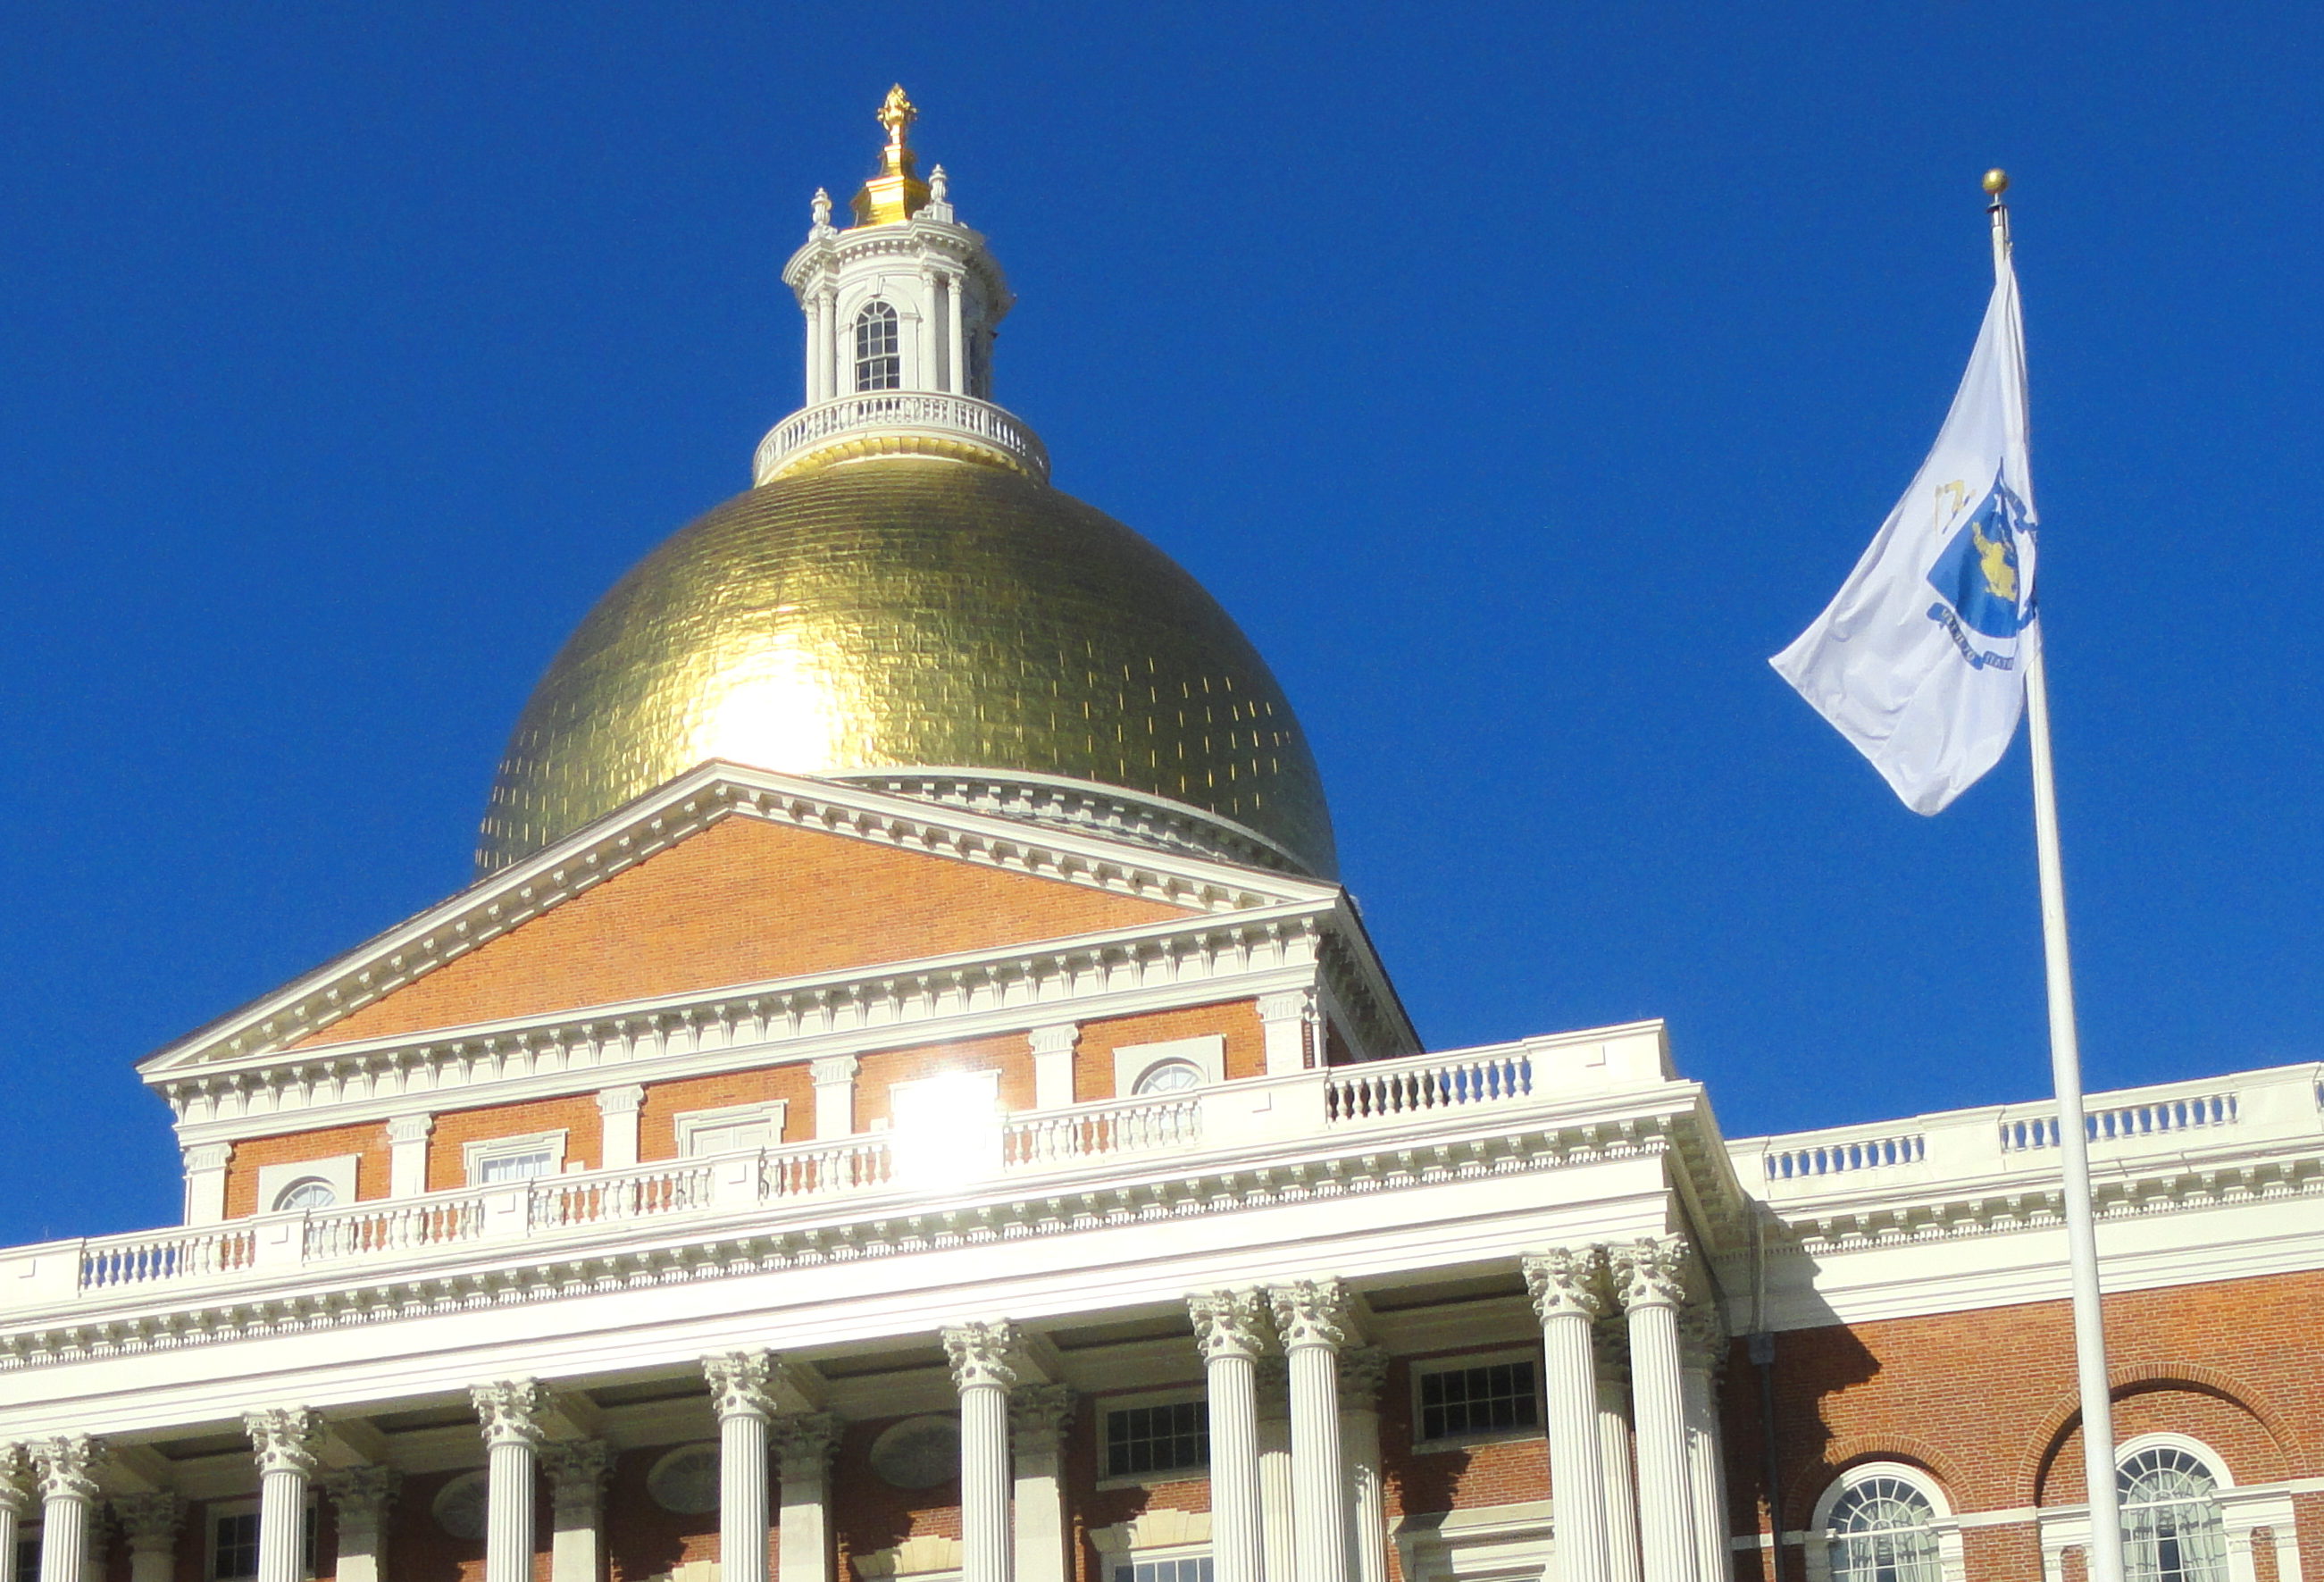 The gold-plated dome of the Massachusetts State House against a blue sky, with the Massachusetts flag flying to the right of the dome in the foreground.